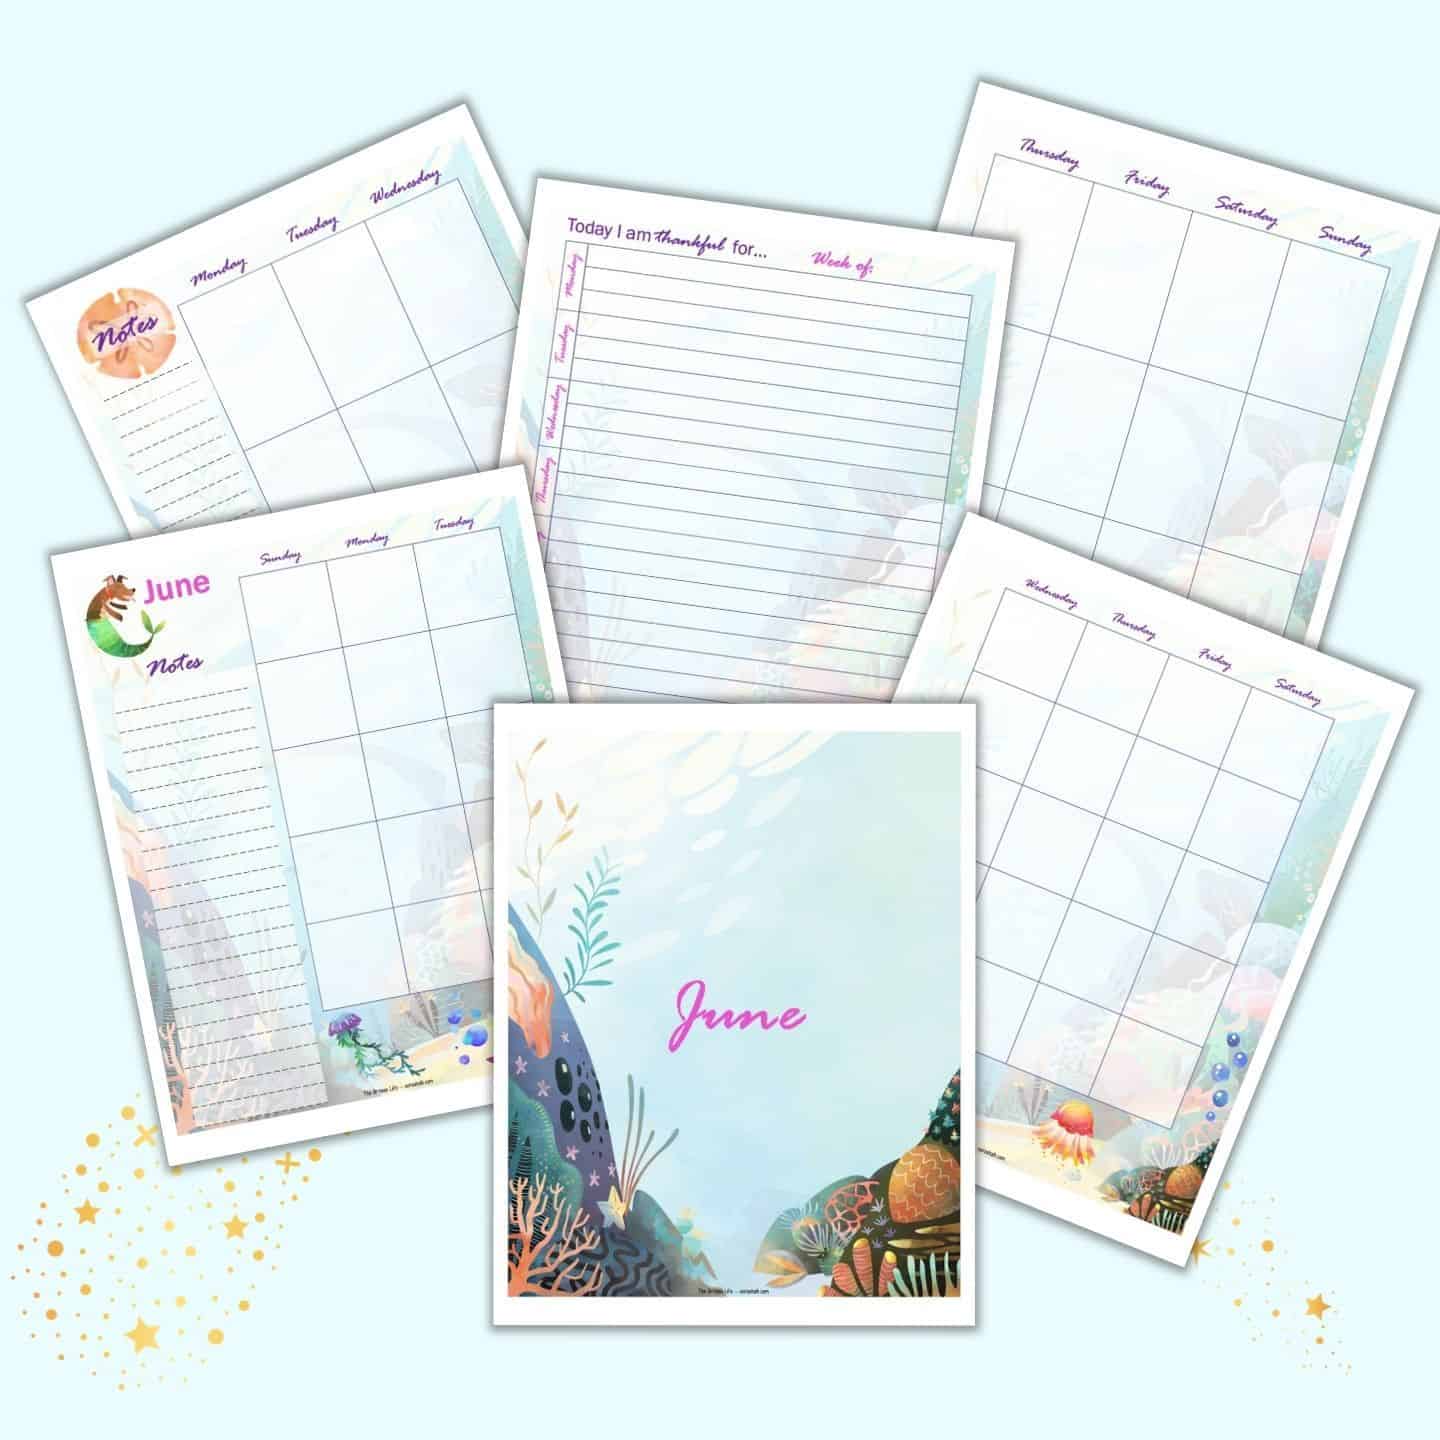 June August Happy Planner Dashboard Coconut Classic Fully Customizable HP Cover Summer Vacay Pineapple Mini Skinny